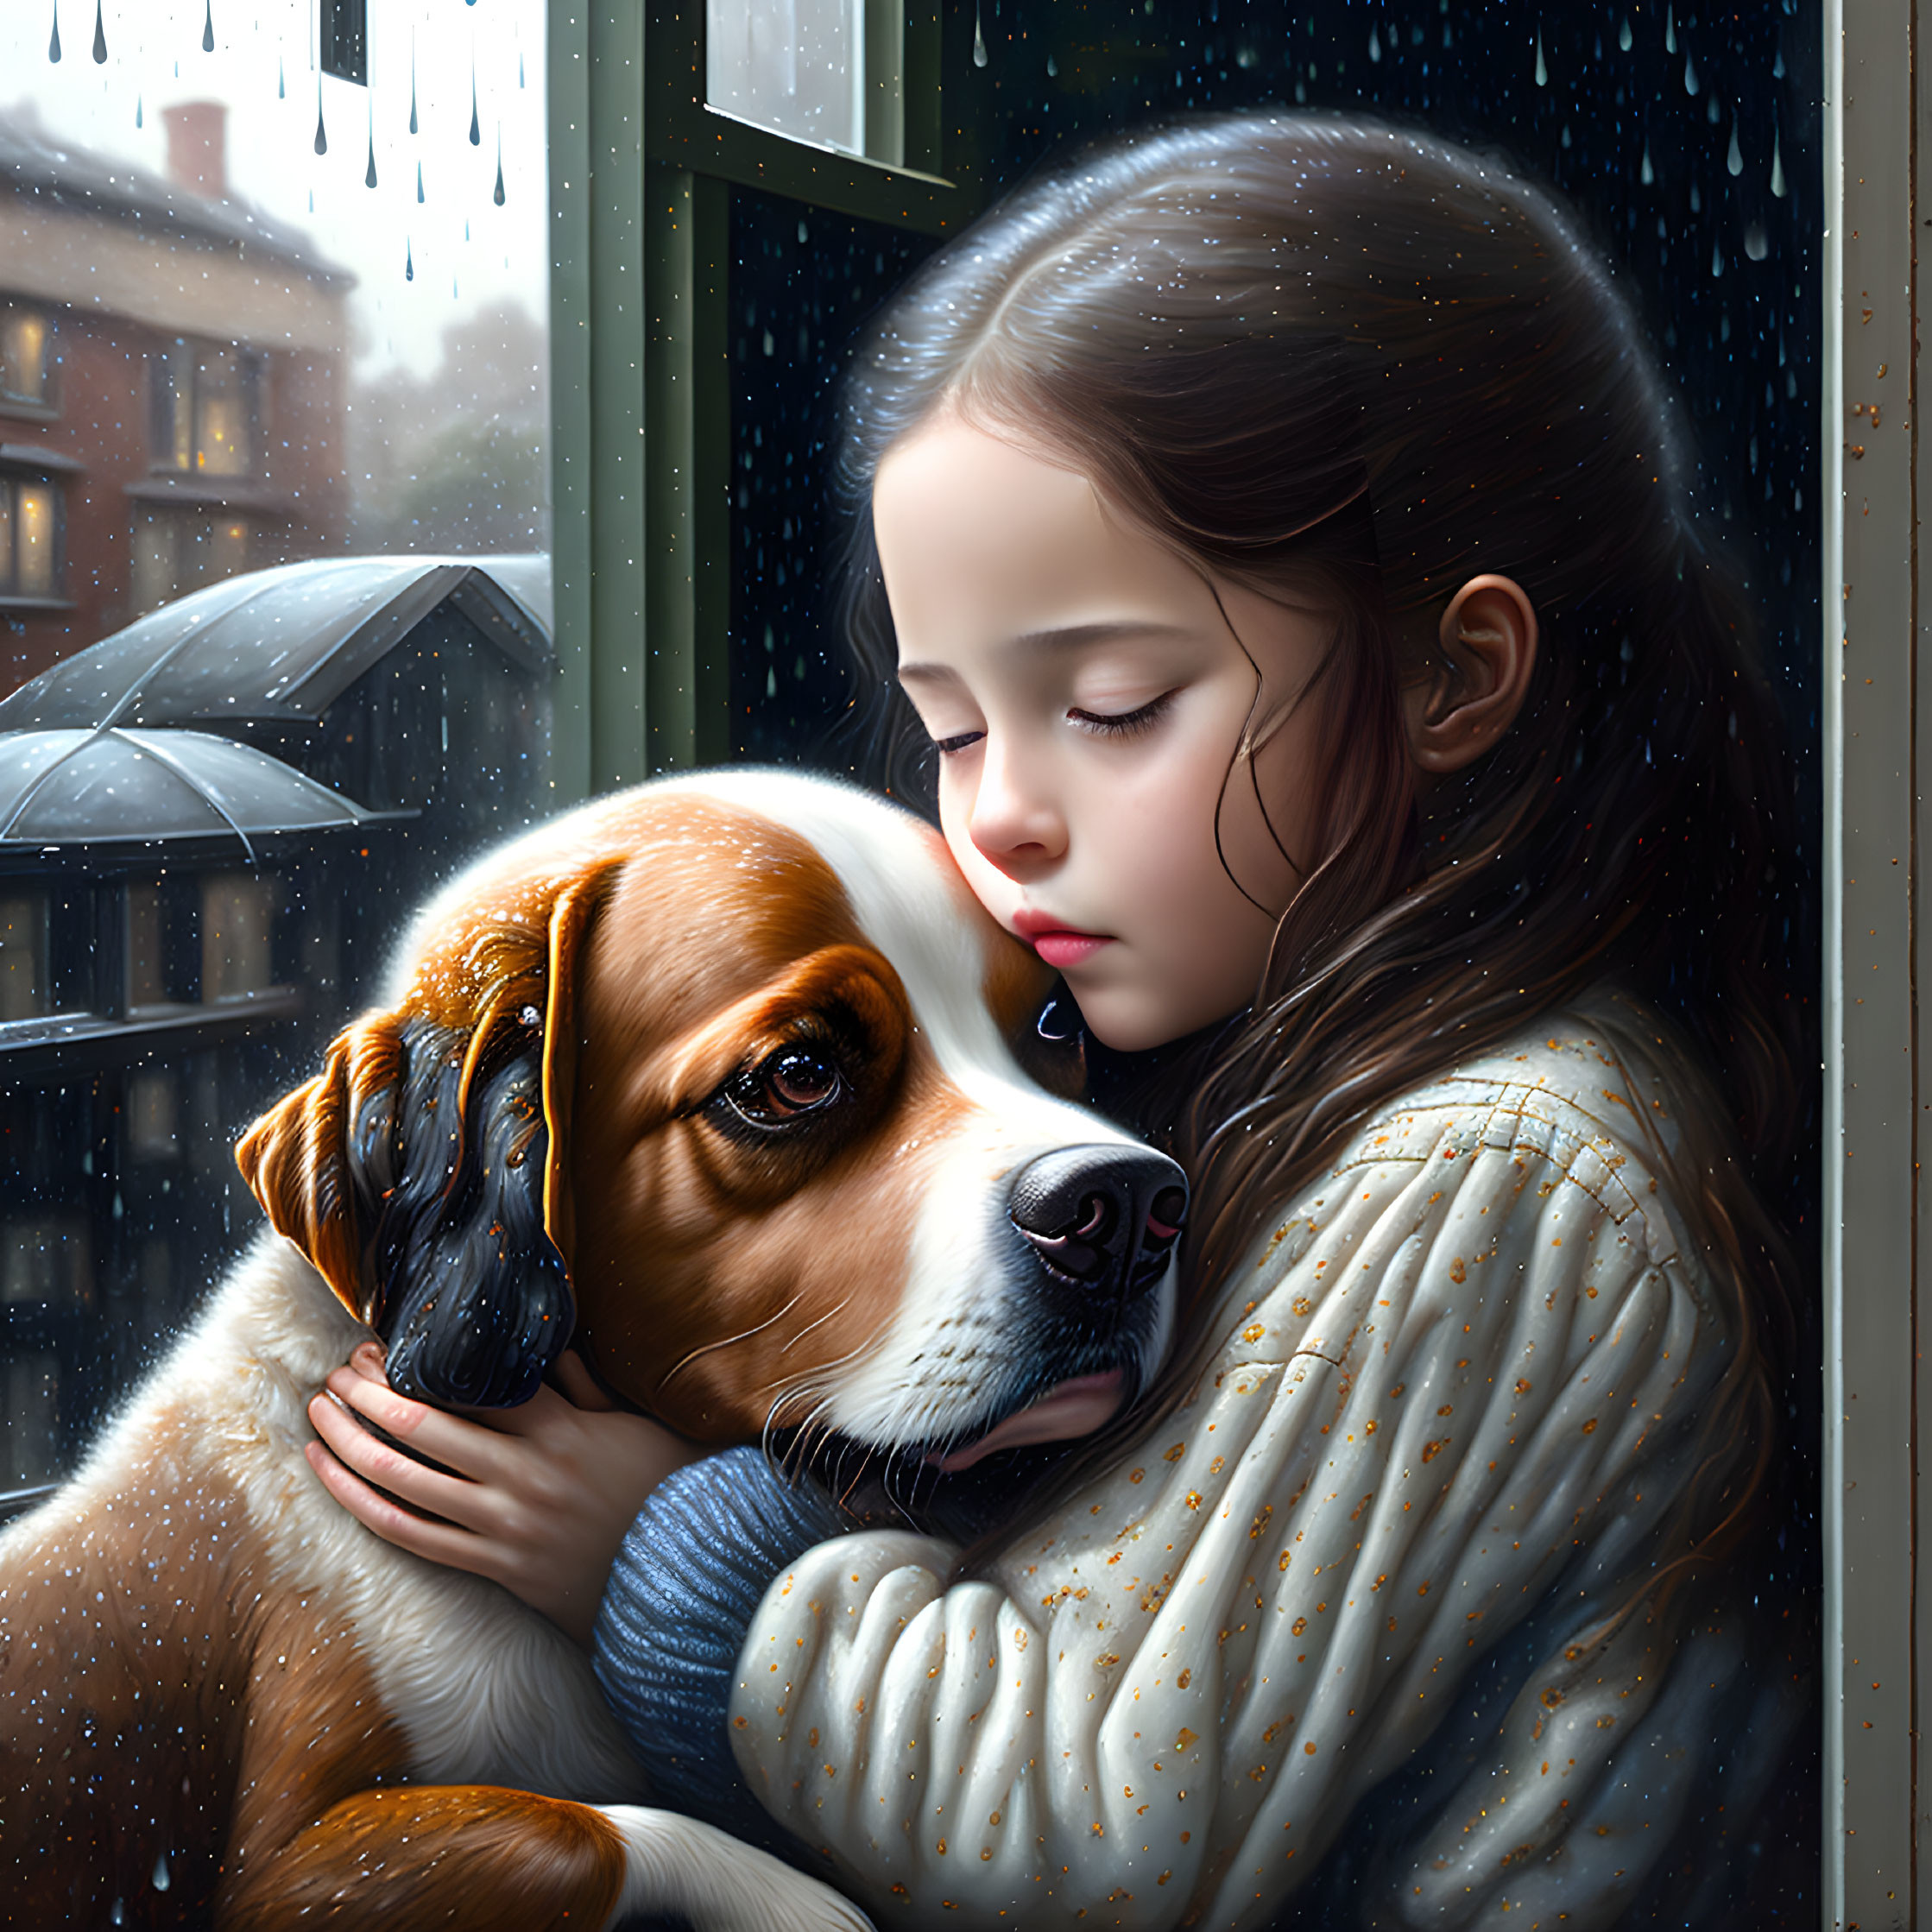 Young girl and beagle embrace by rain-splattered window with umbrella.